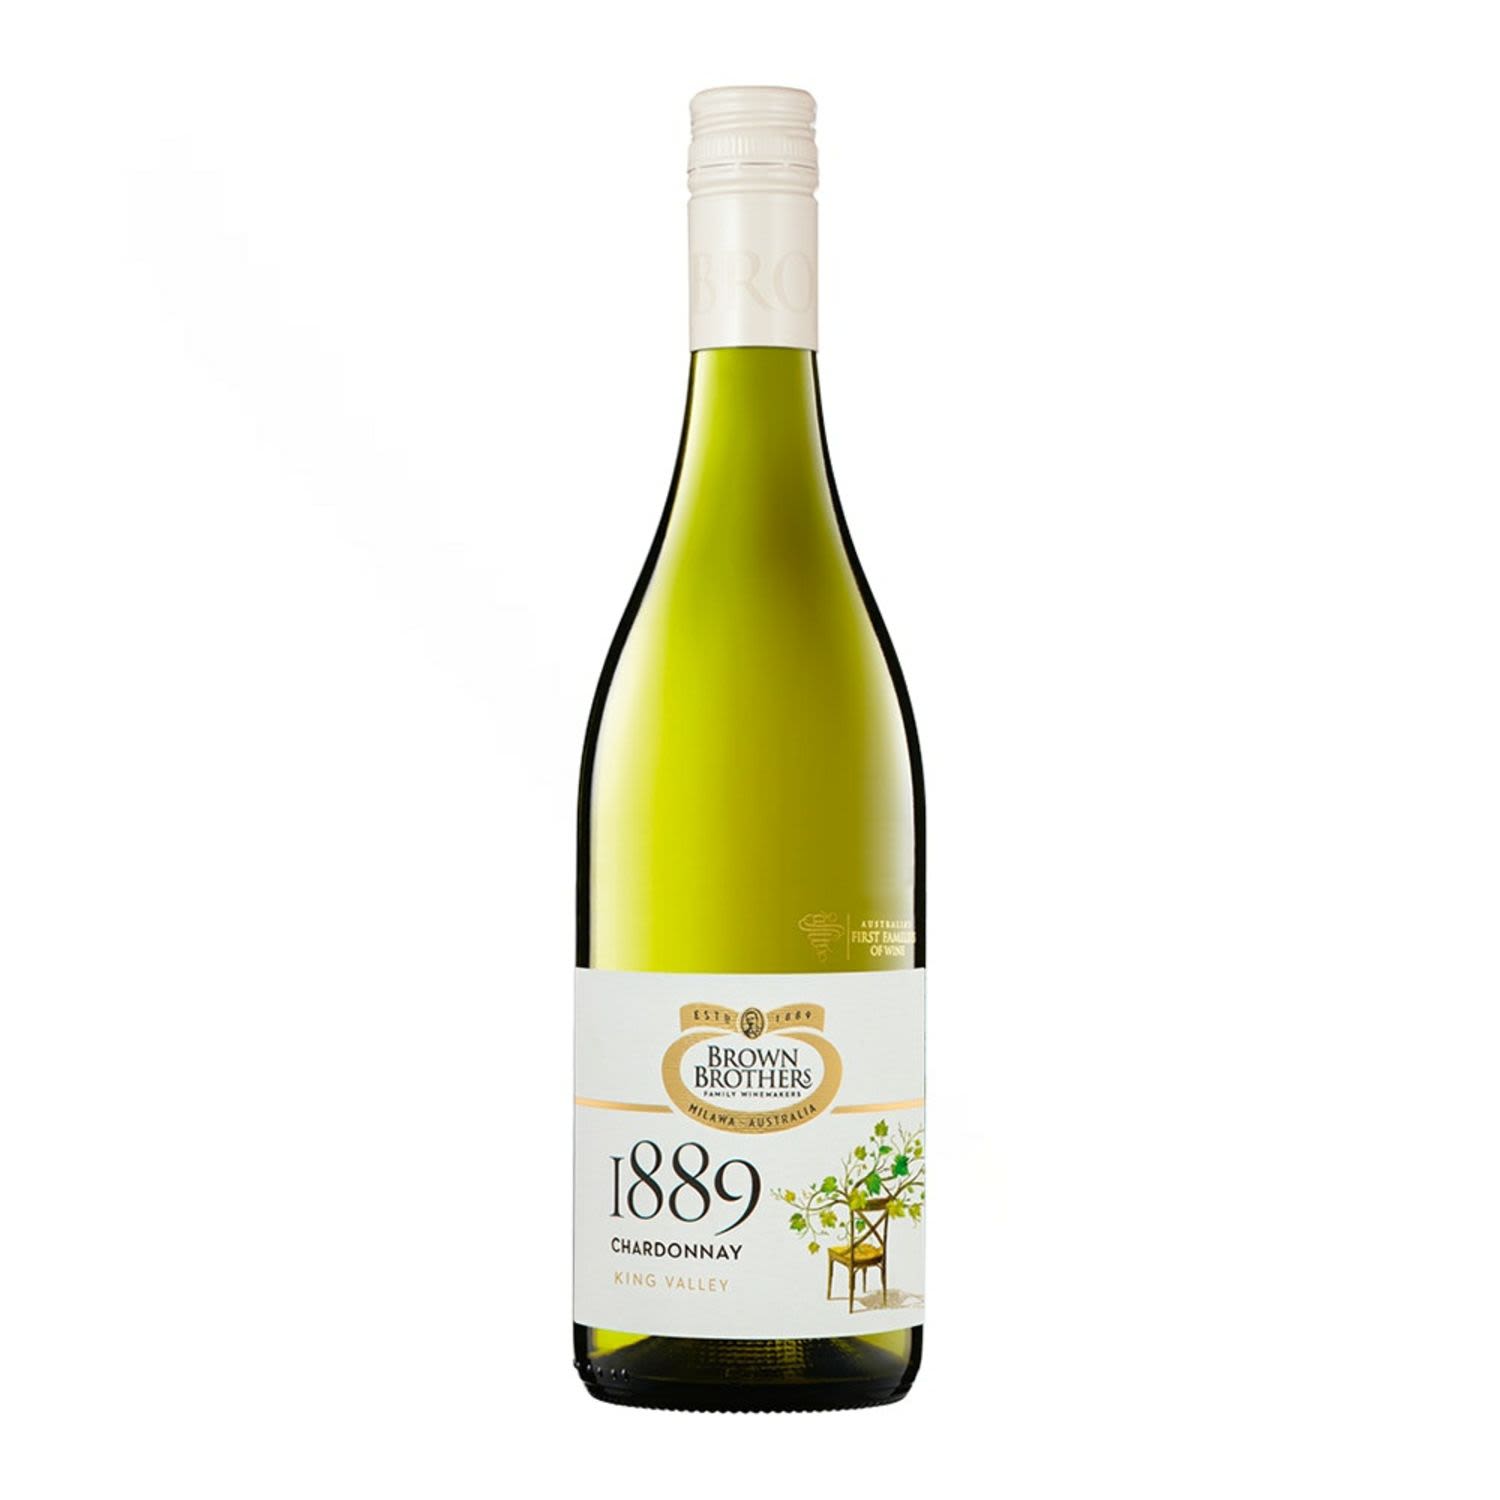 Brown Brothers 1889 Chardonnay 750mL Bottle